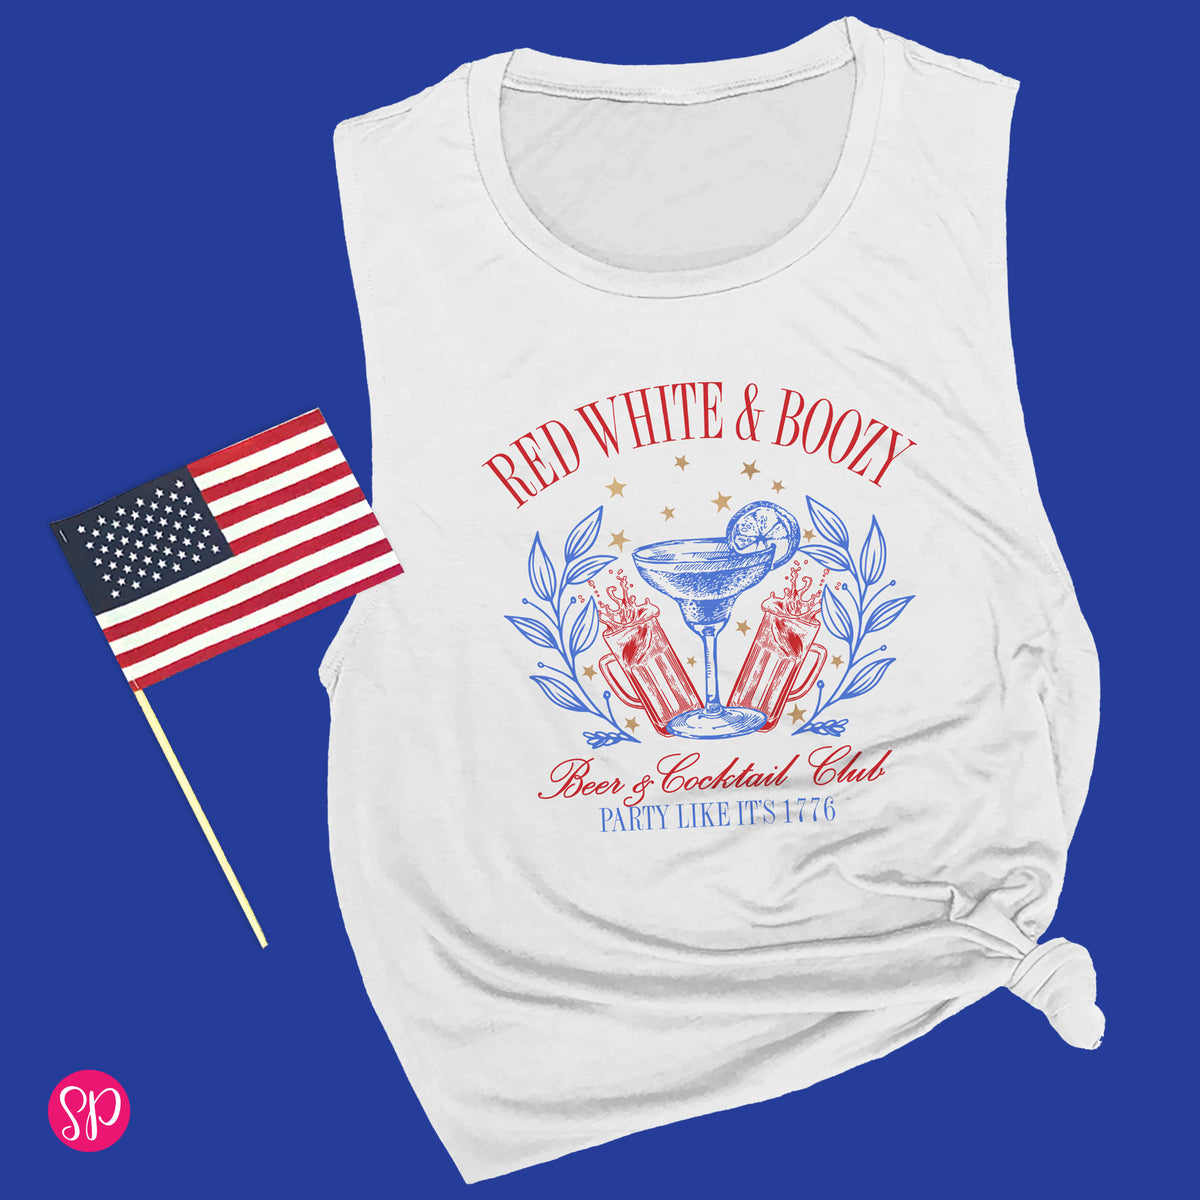 Red White & Boozy, Beer & Cocktail Club Muscle Tee